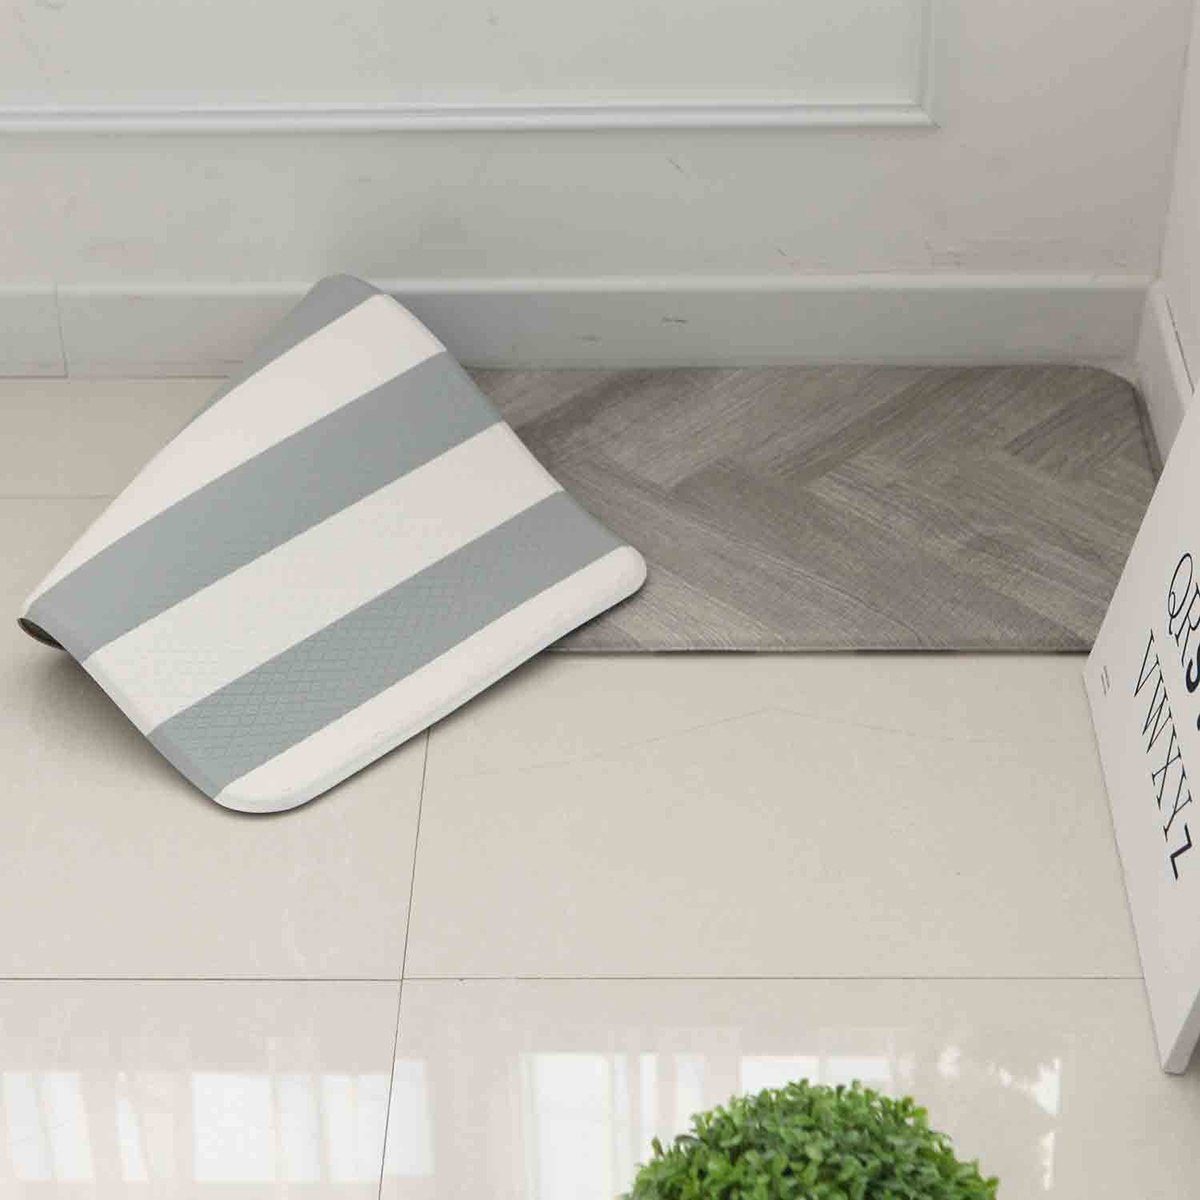 This 'Life Changing' Kitchen Mat Is Durable, Easy to Clean, and